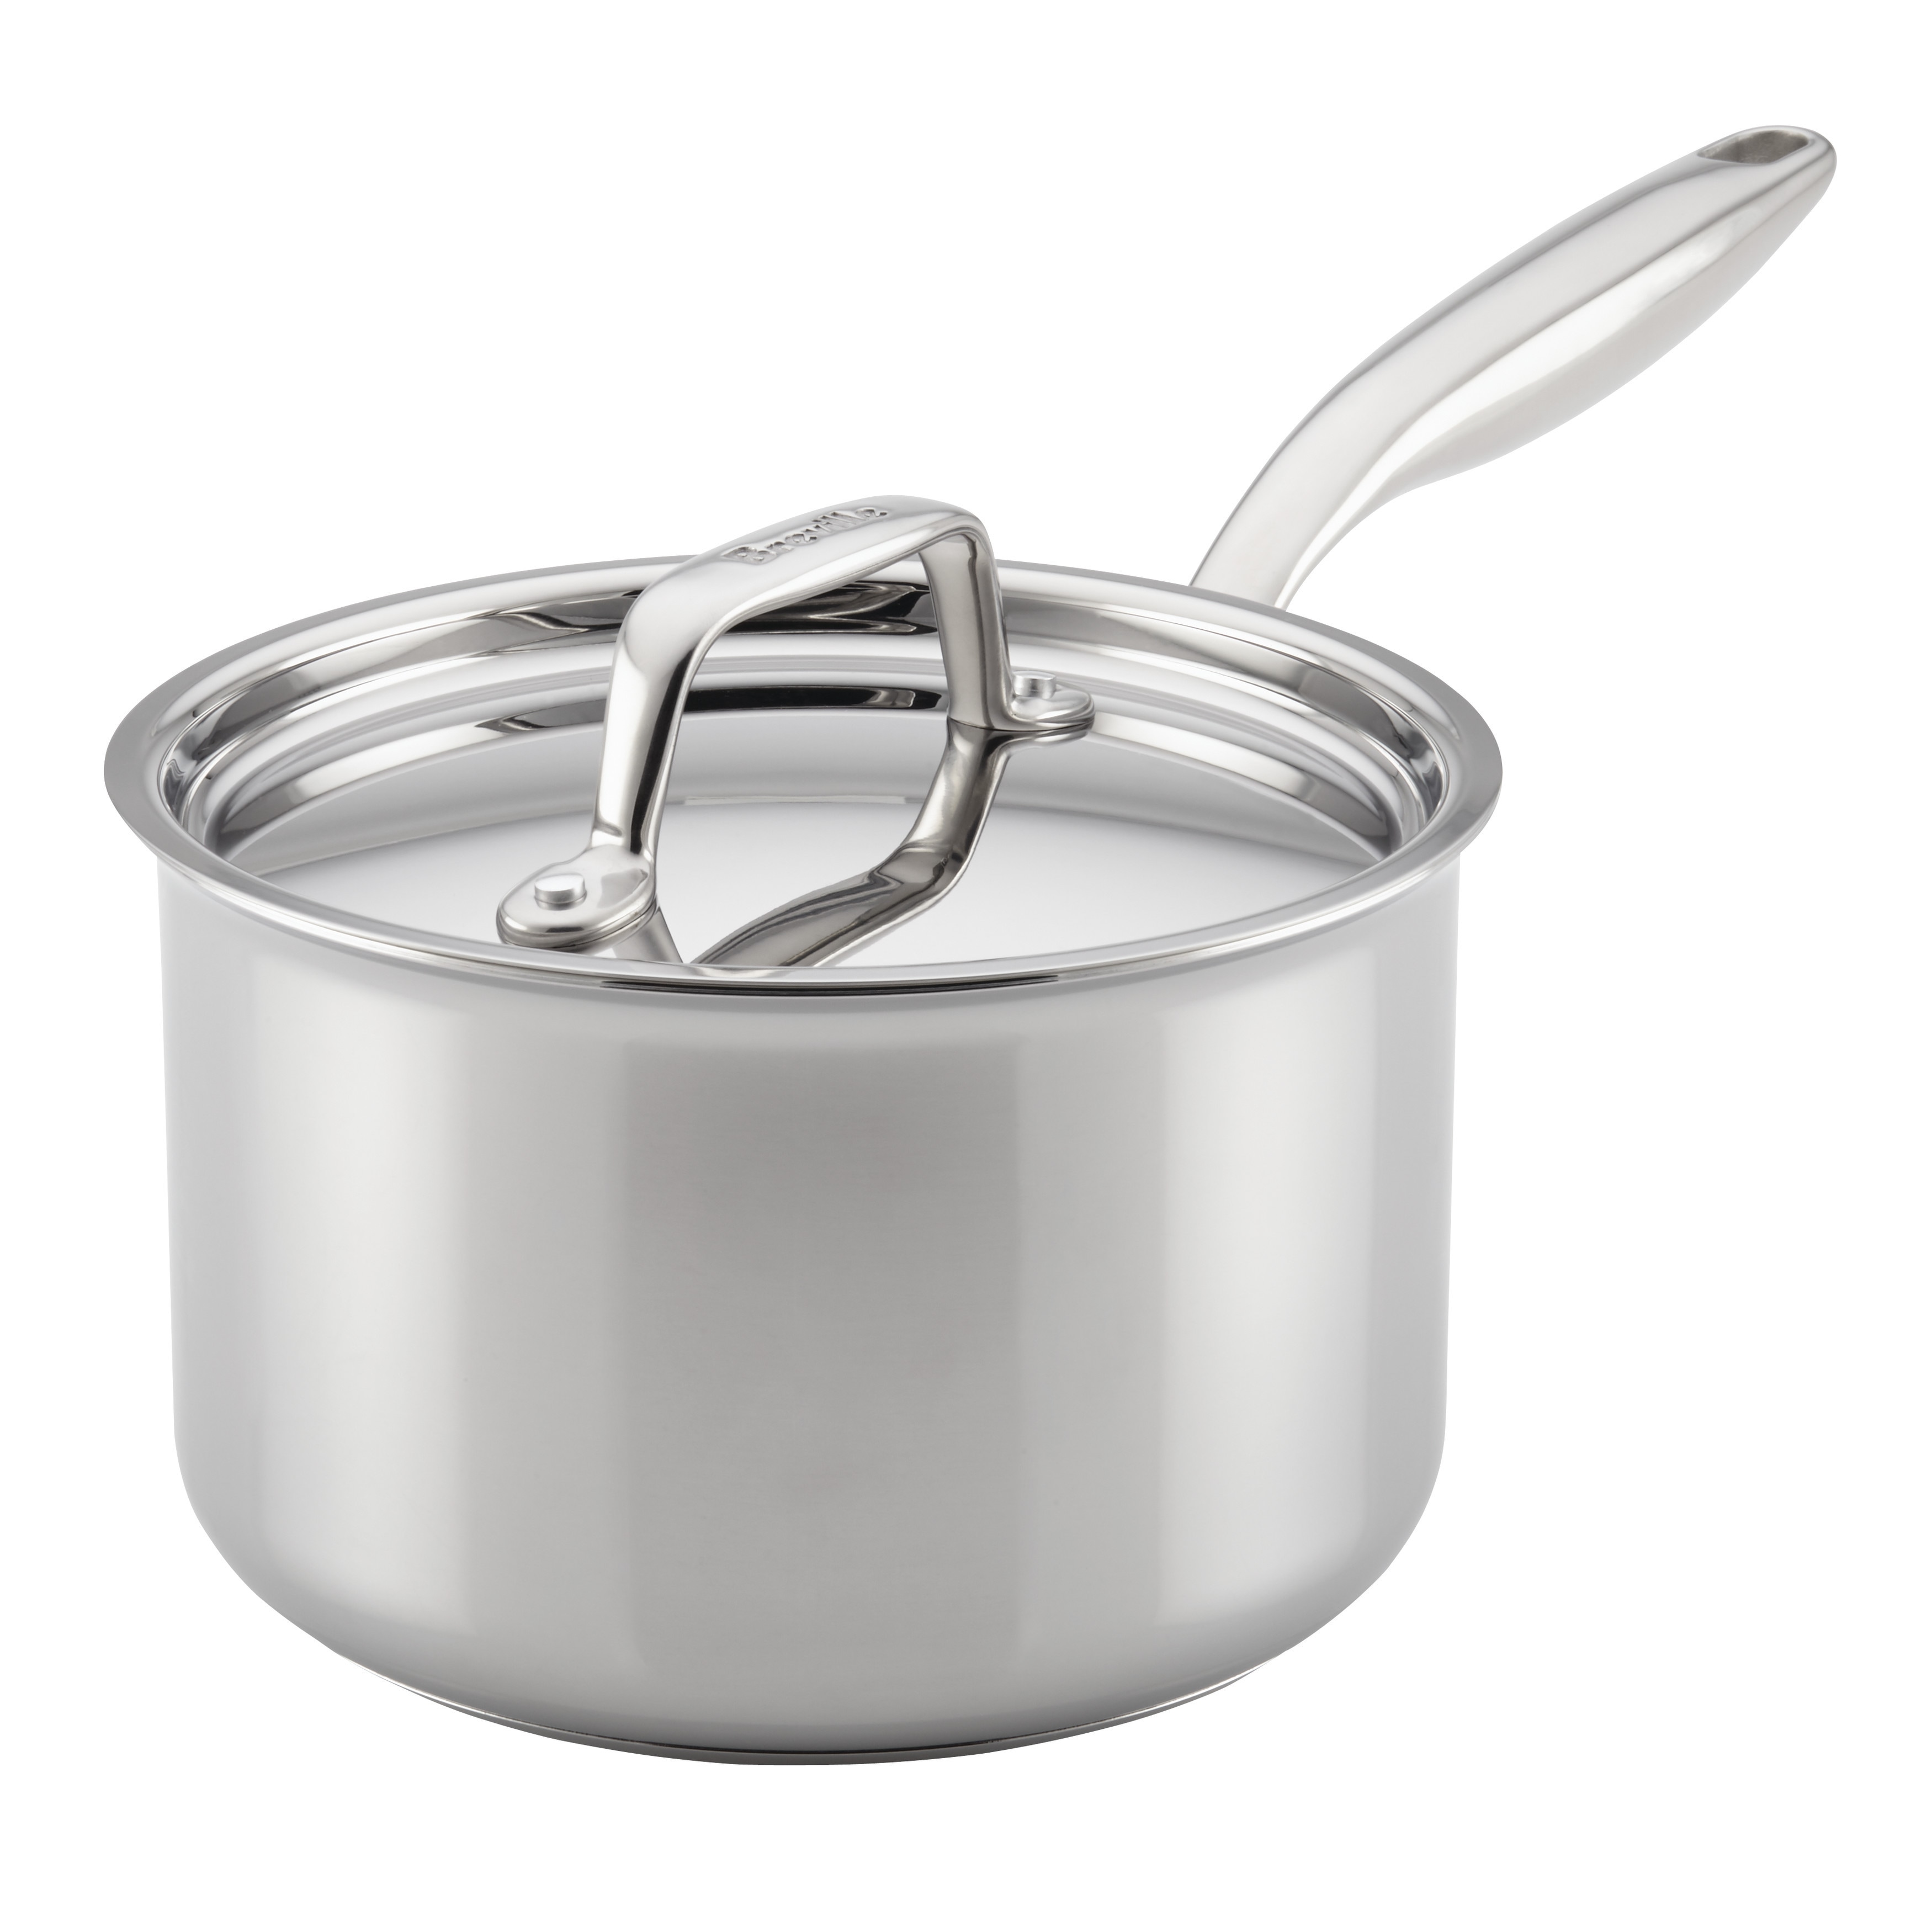 Professional Series™ Cookware 1.5 Quart Saucepan with Cover